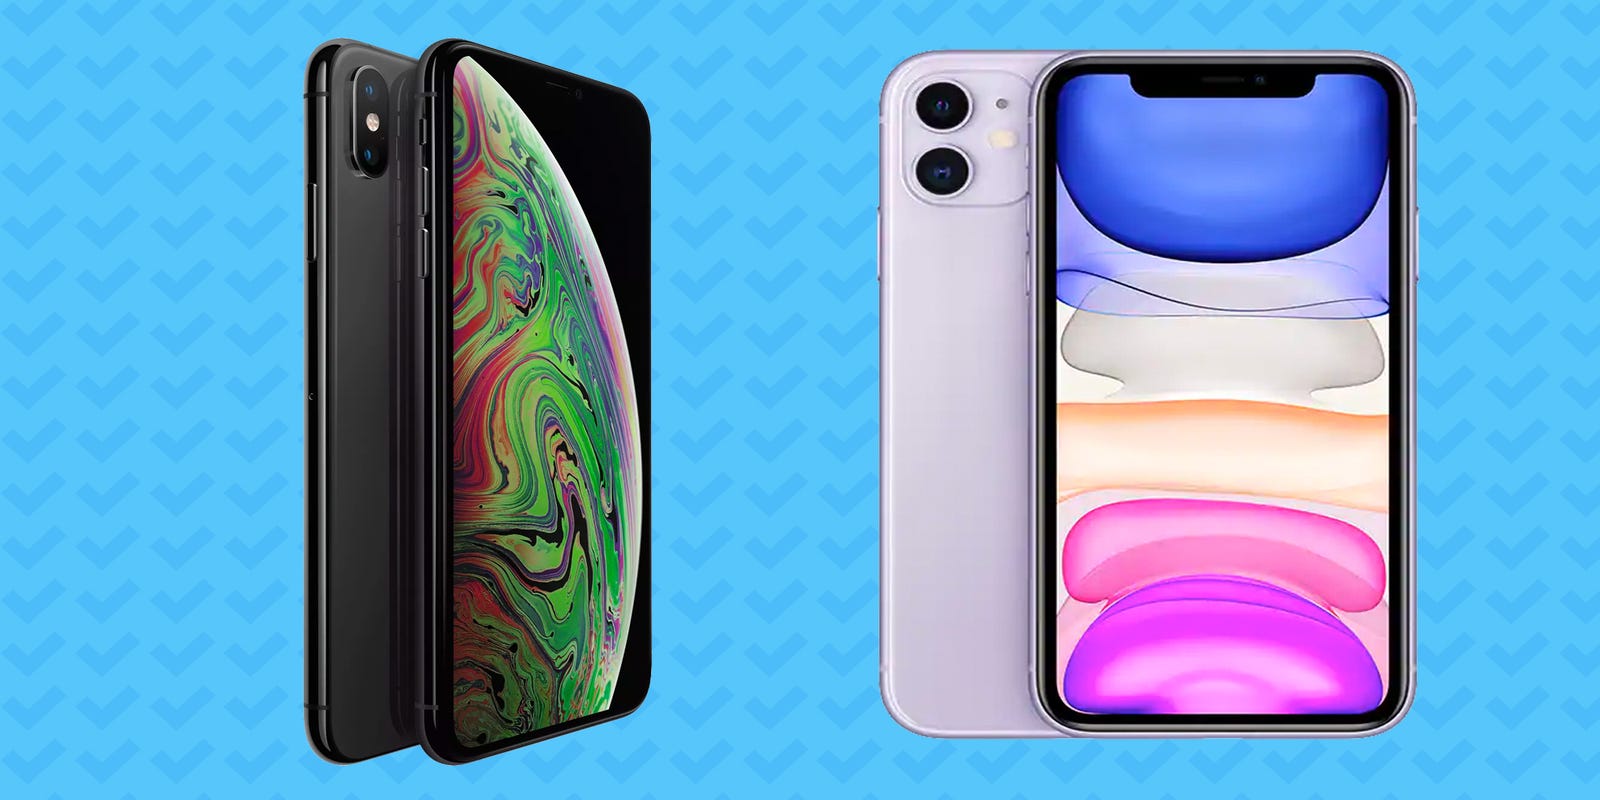 Cyber Monday 2019: The best Apple iPhone deals you can already get